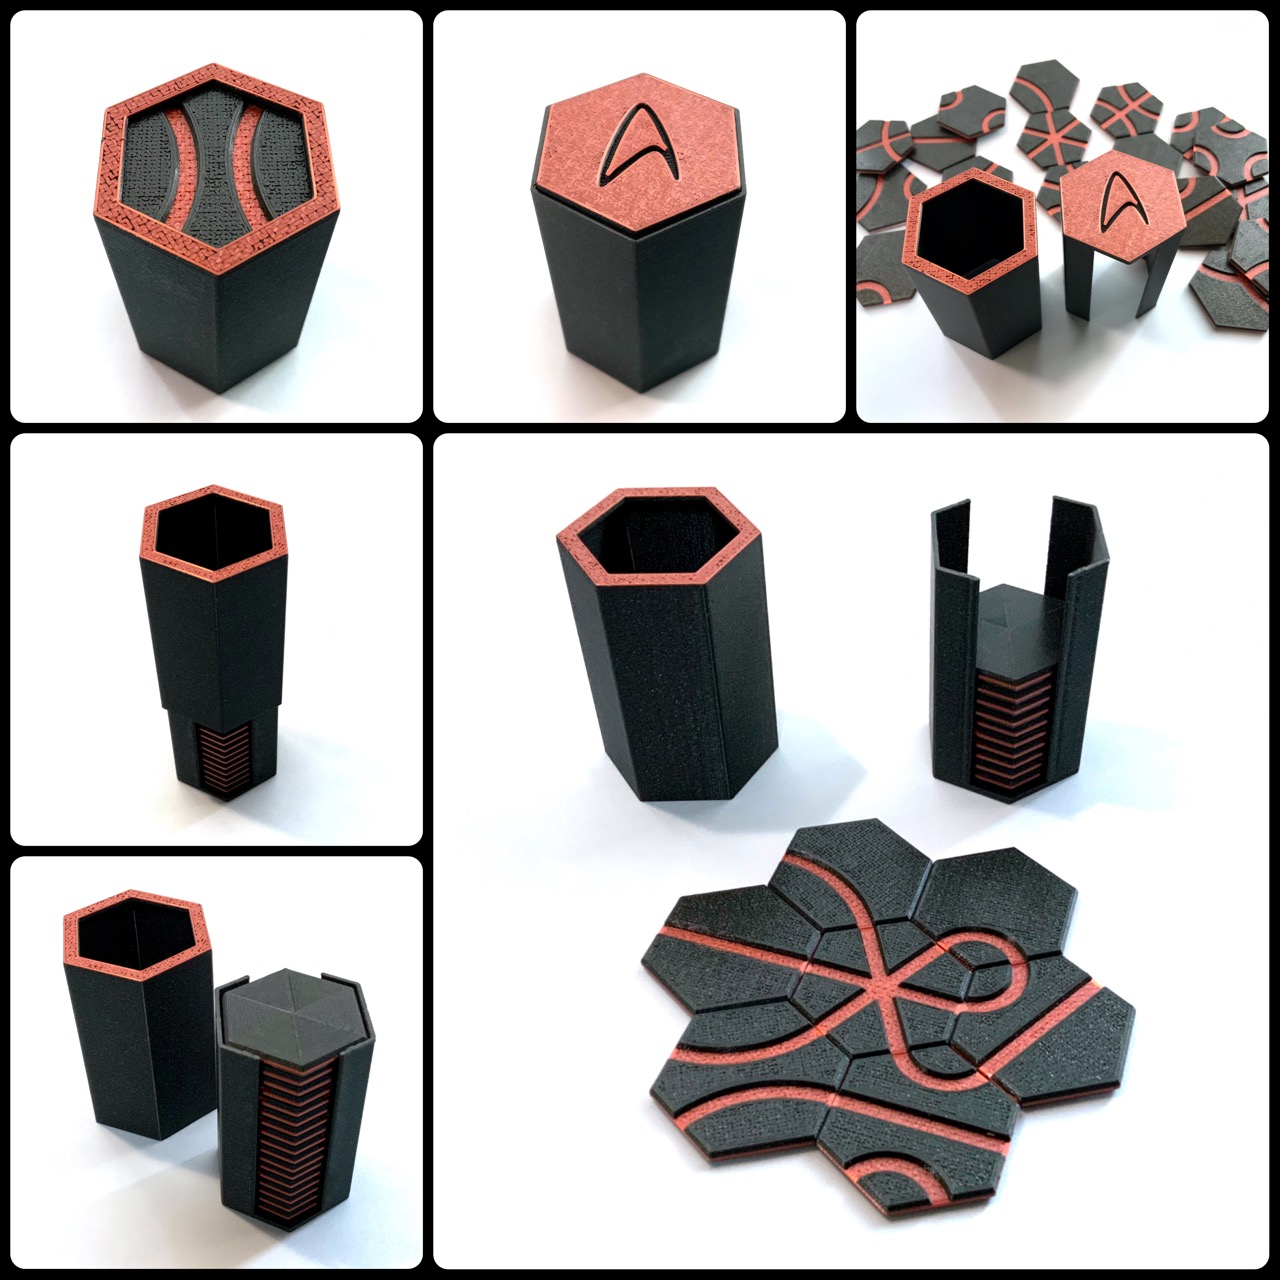 Holder / tower and lid for hexagonal game tiles